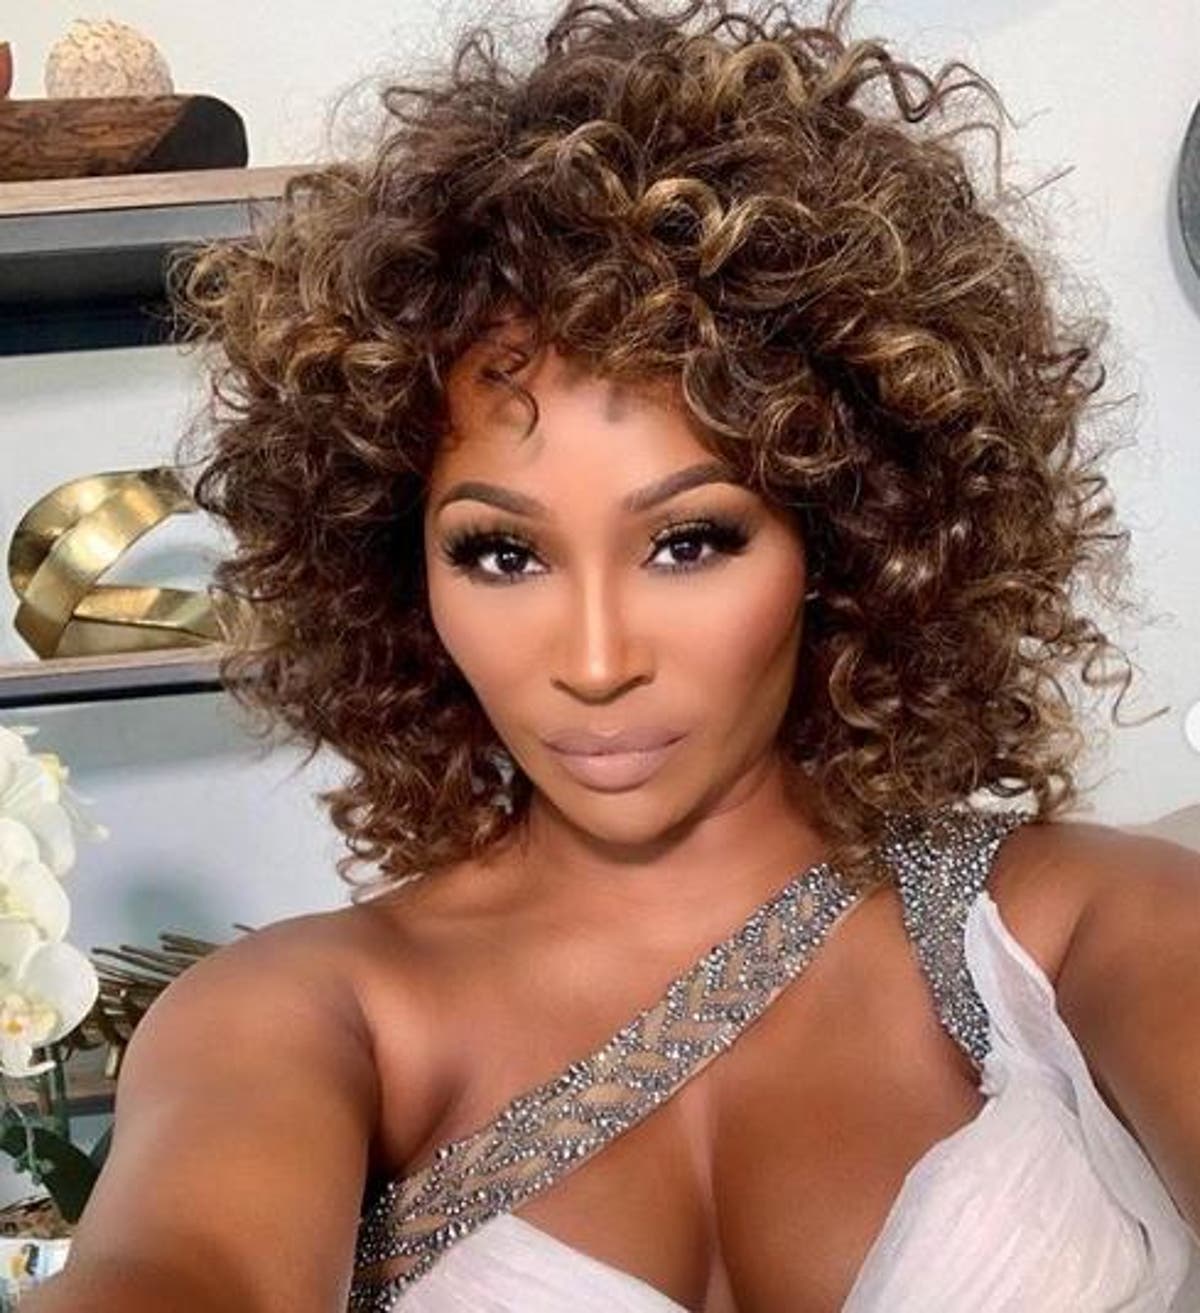 Cynthia Bailey Shows Fans A Throwback Photo From When She Used To Have Short Hair - She Looks Like Her Daughter, Noelle Robinson